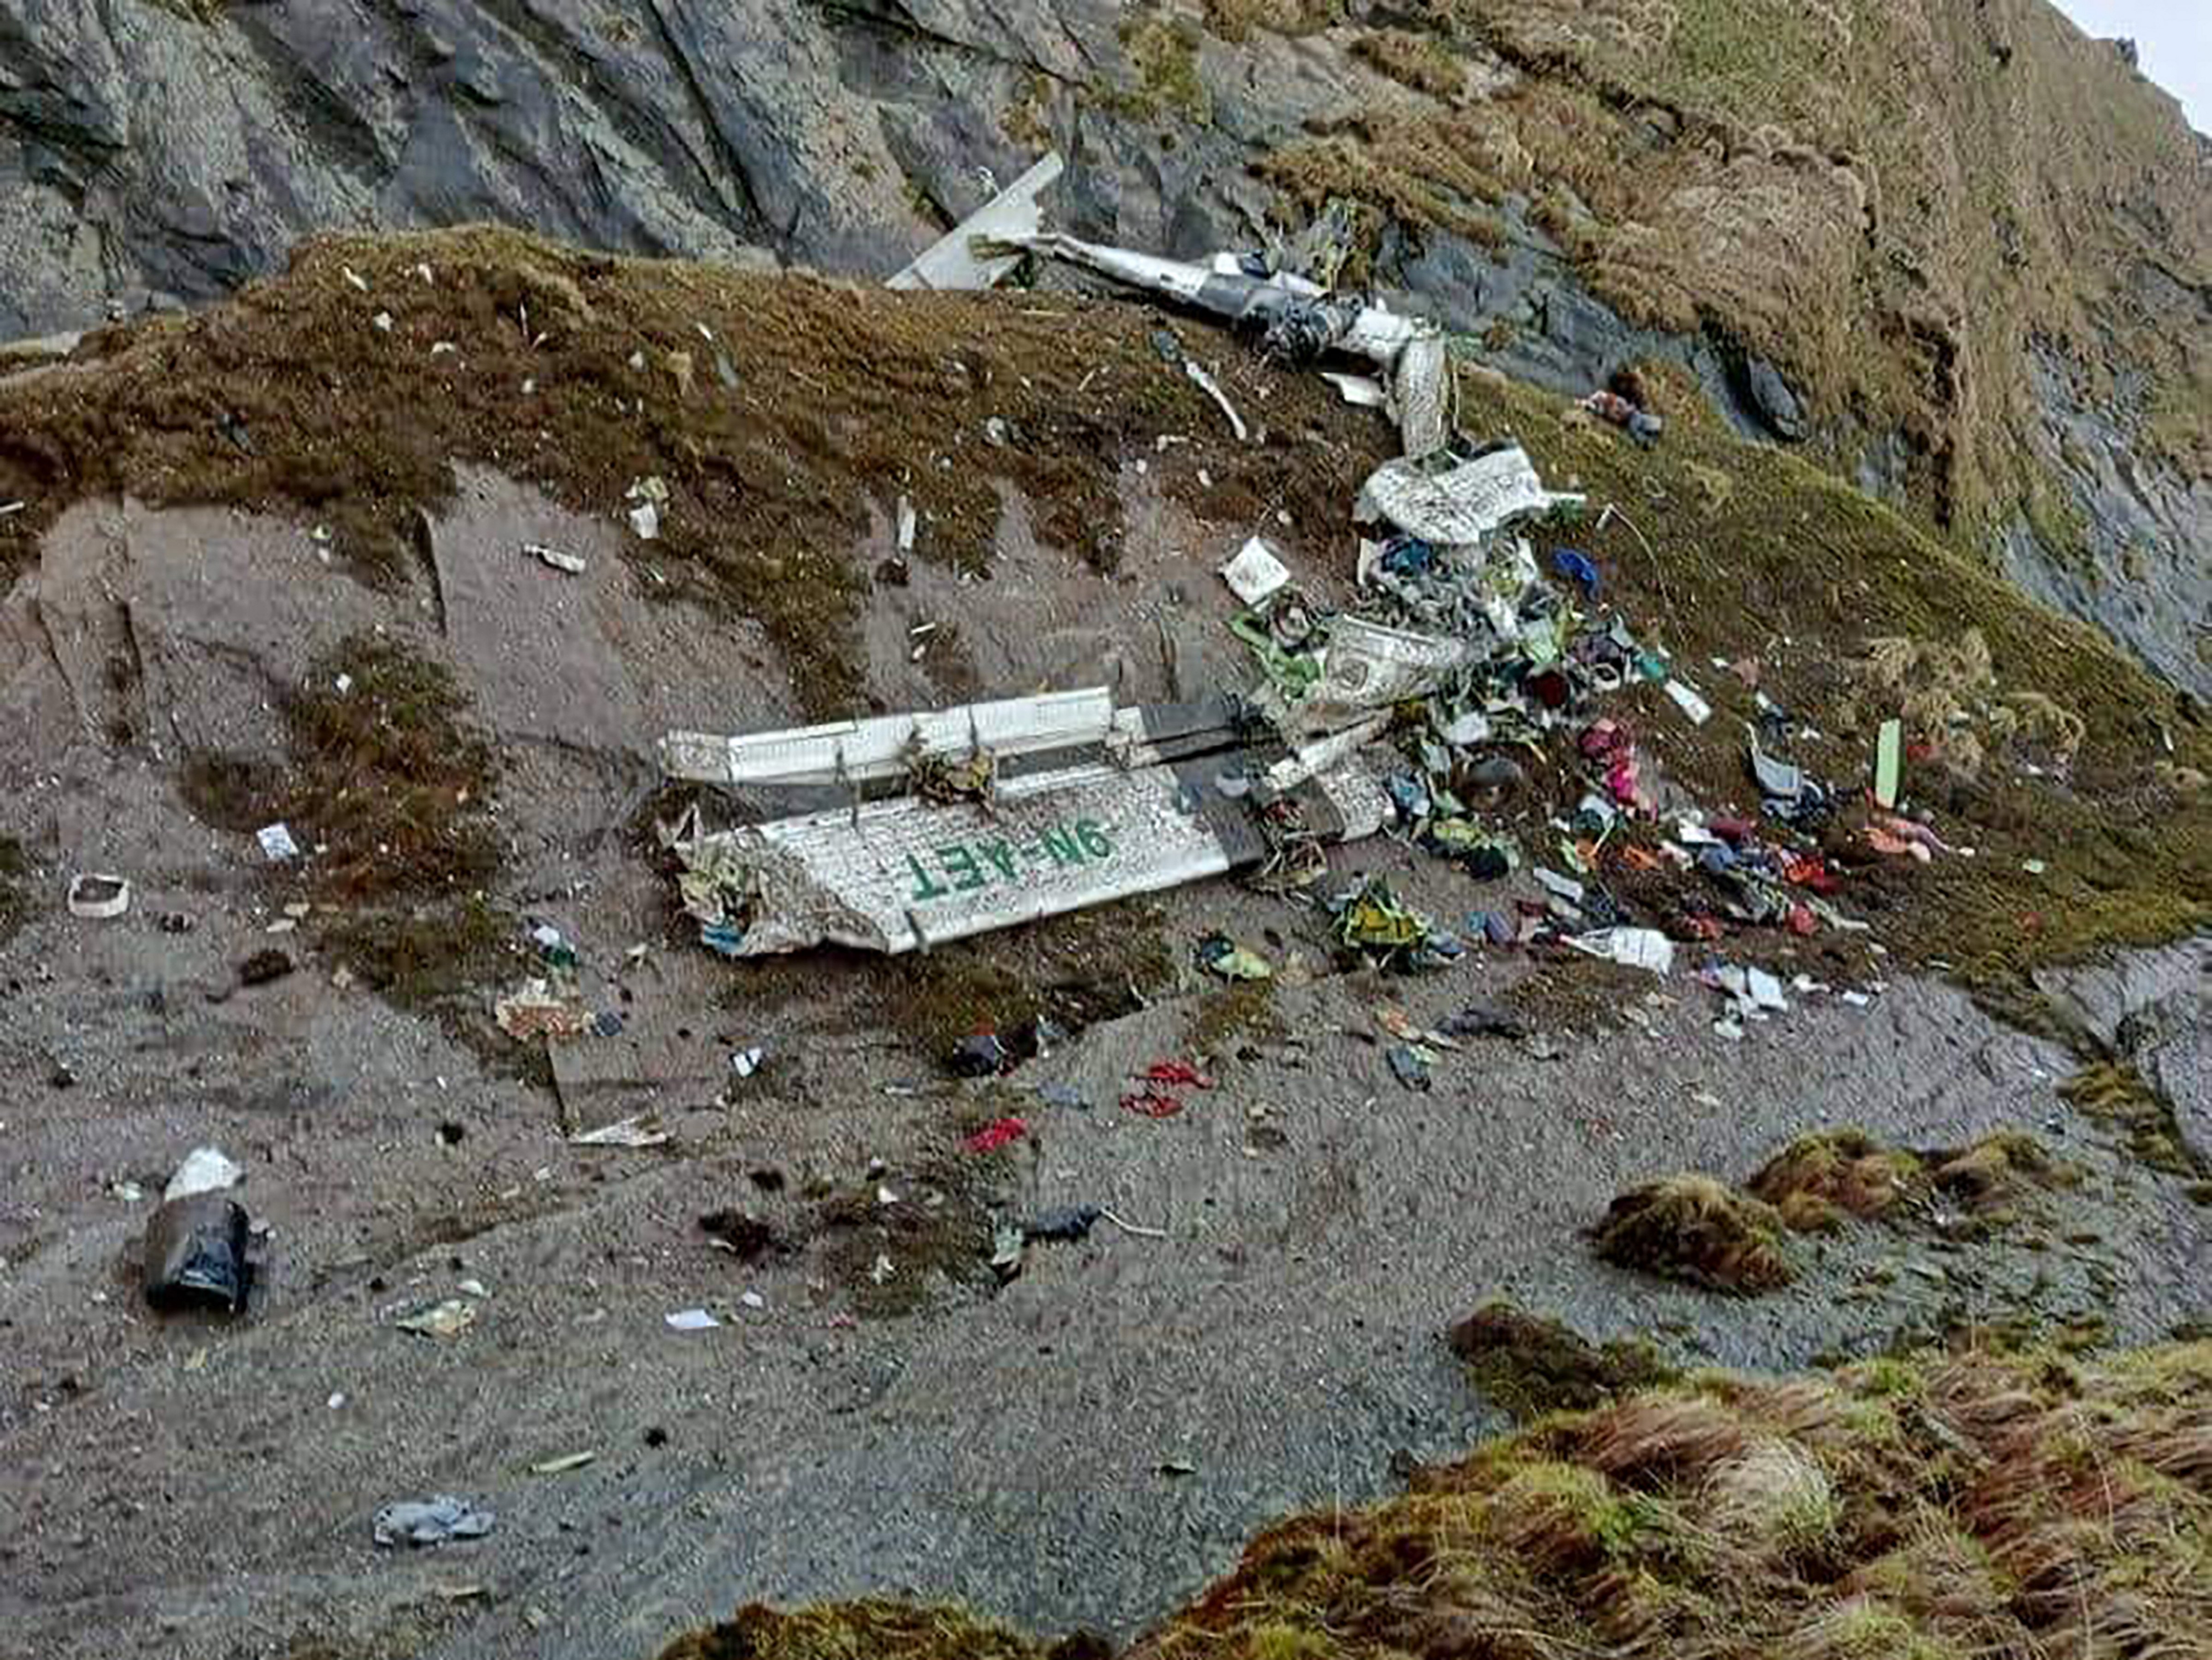 Indian Embassy in Nepal condoles death of 22 people, including 4 Indians, in Tara Air plane crash